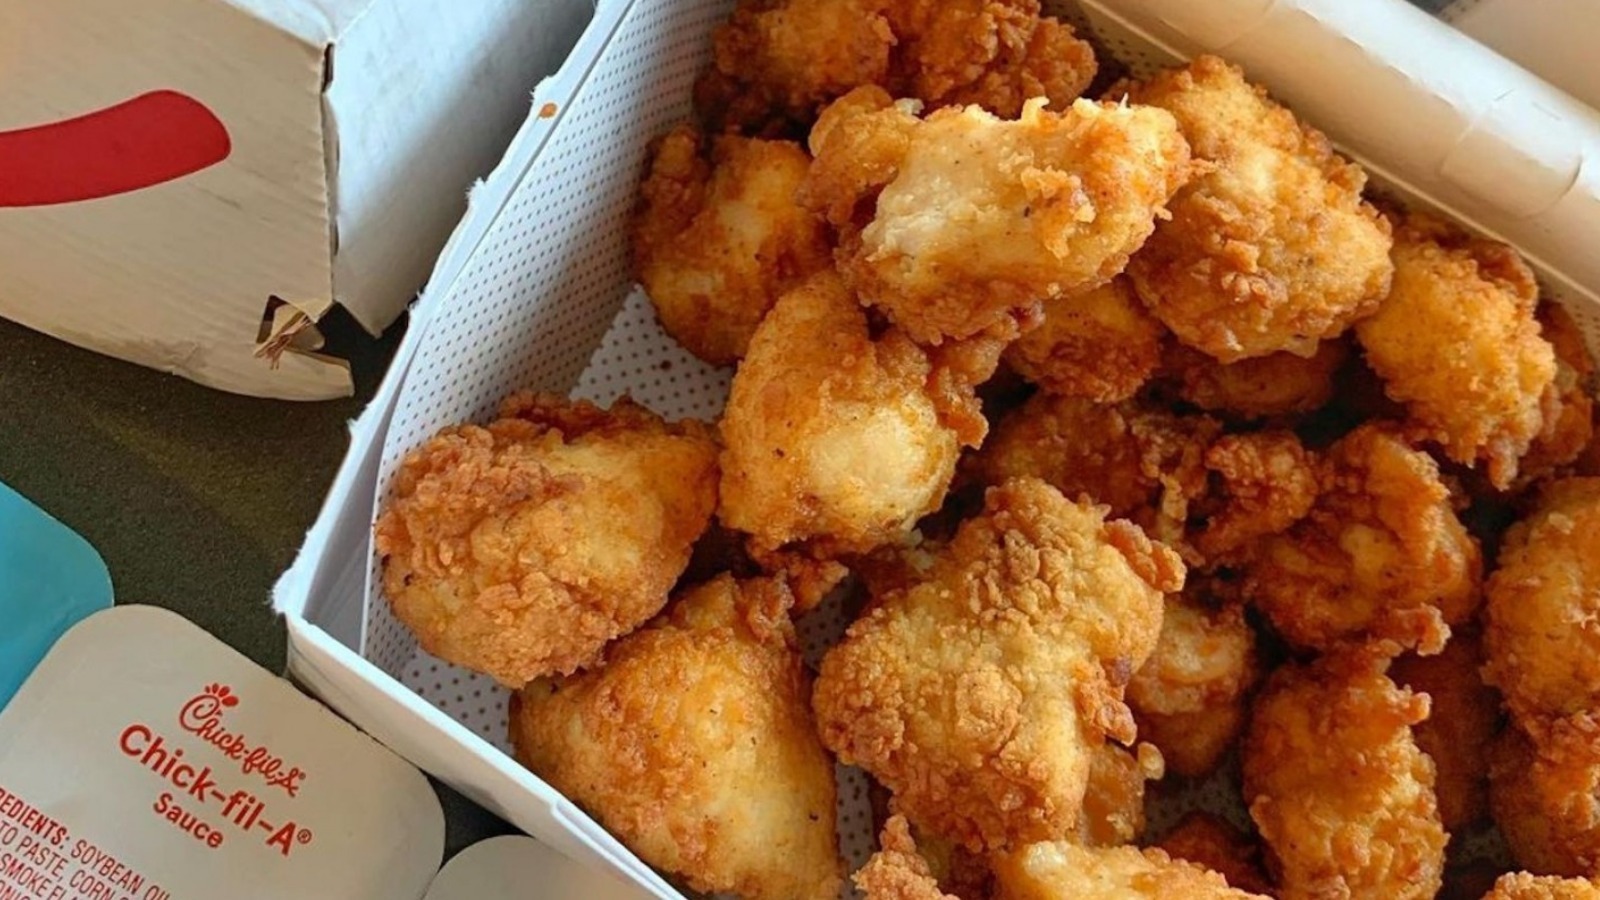 Are Chick Fil A Grilled Nuggets Gluten Free? Discover the Truth.